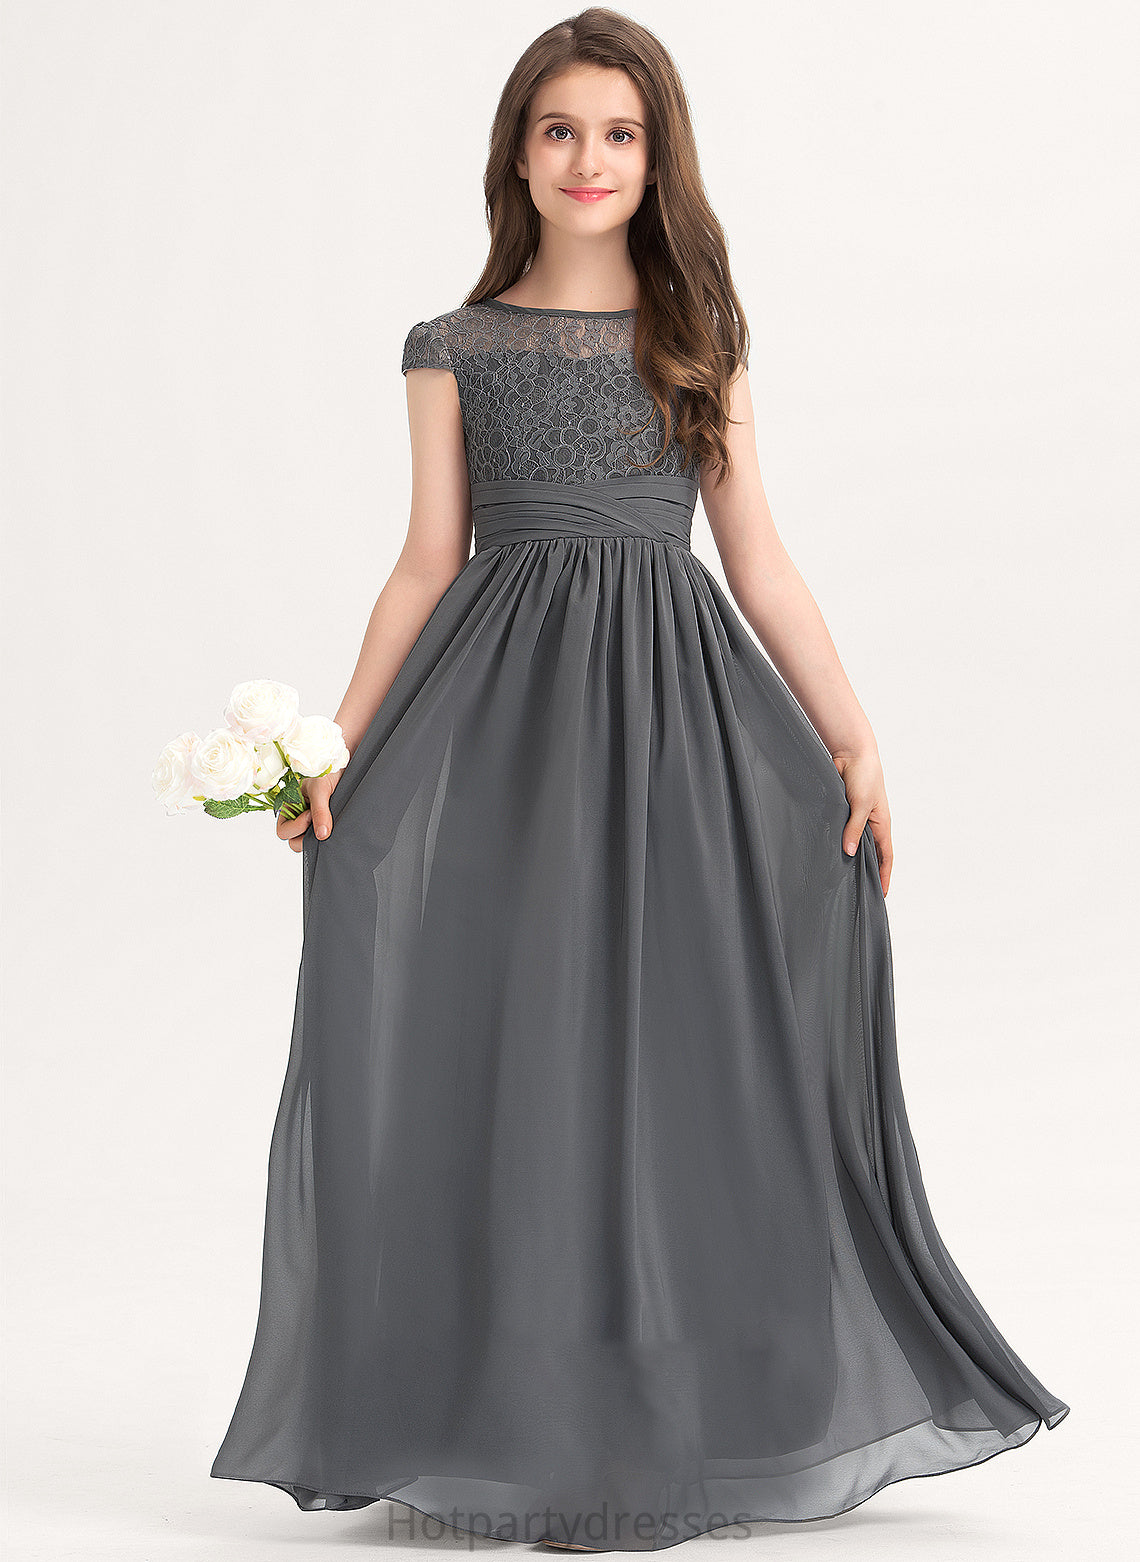 With Floor-Length Scoop Ruffle Neck Junior Bridesmaid Dresses Lace A-Line Carina Chiffon